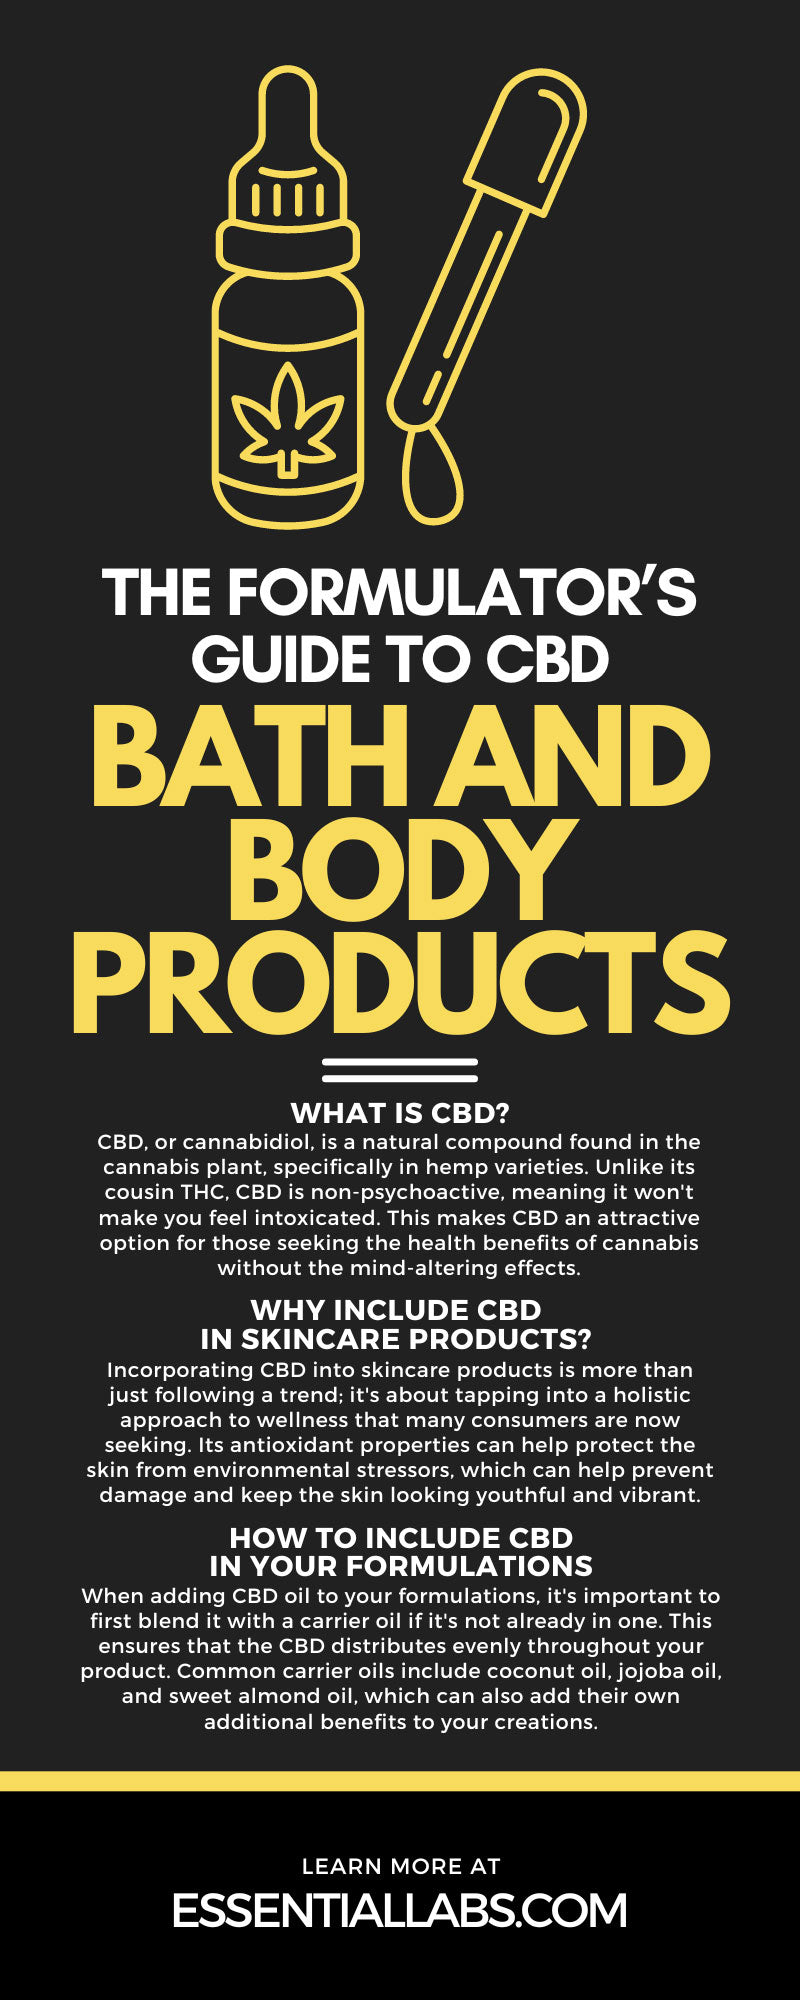 The Formulator’s Guide to CBD Bath and Body Products